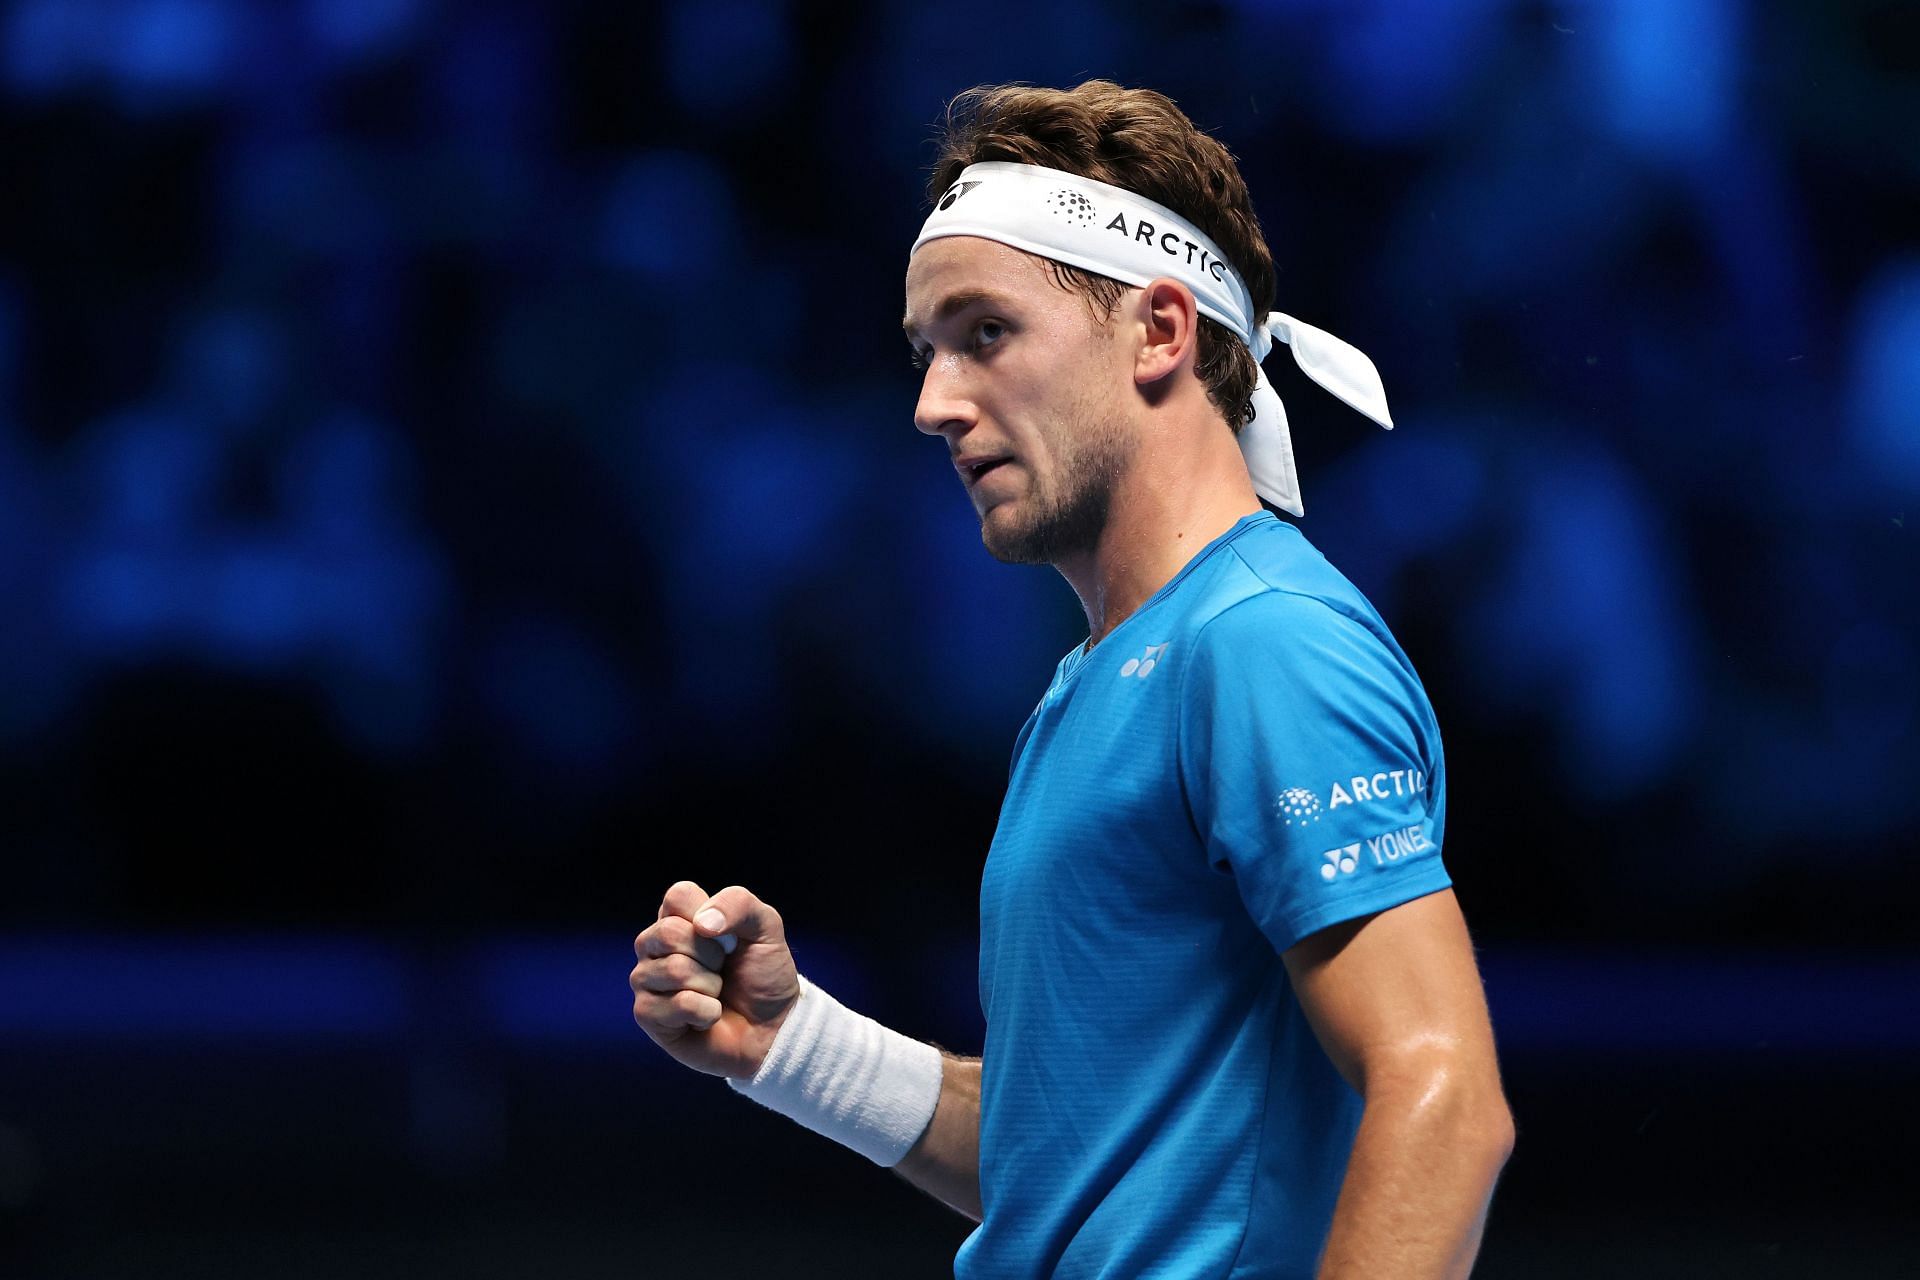 Casper Ruud celebrates a point at the Nitto ATP World Tour Finals